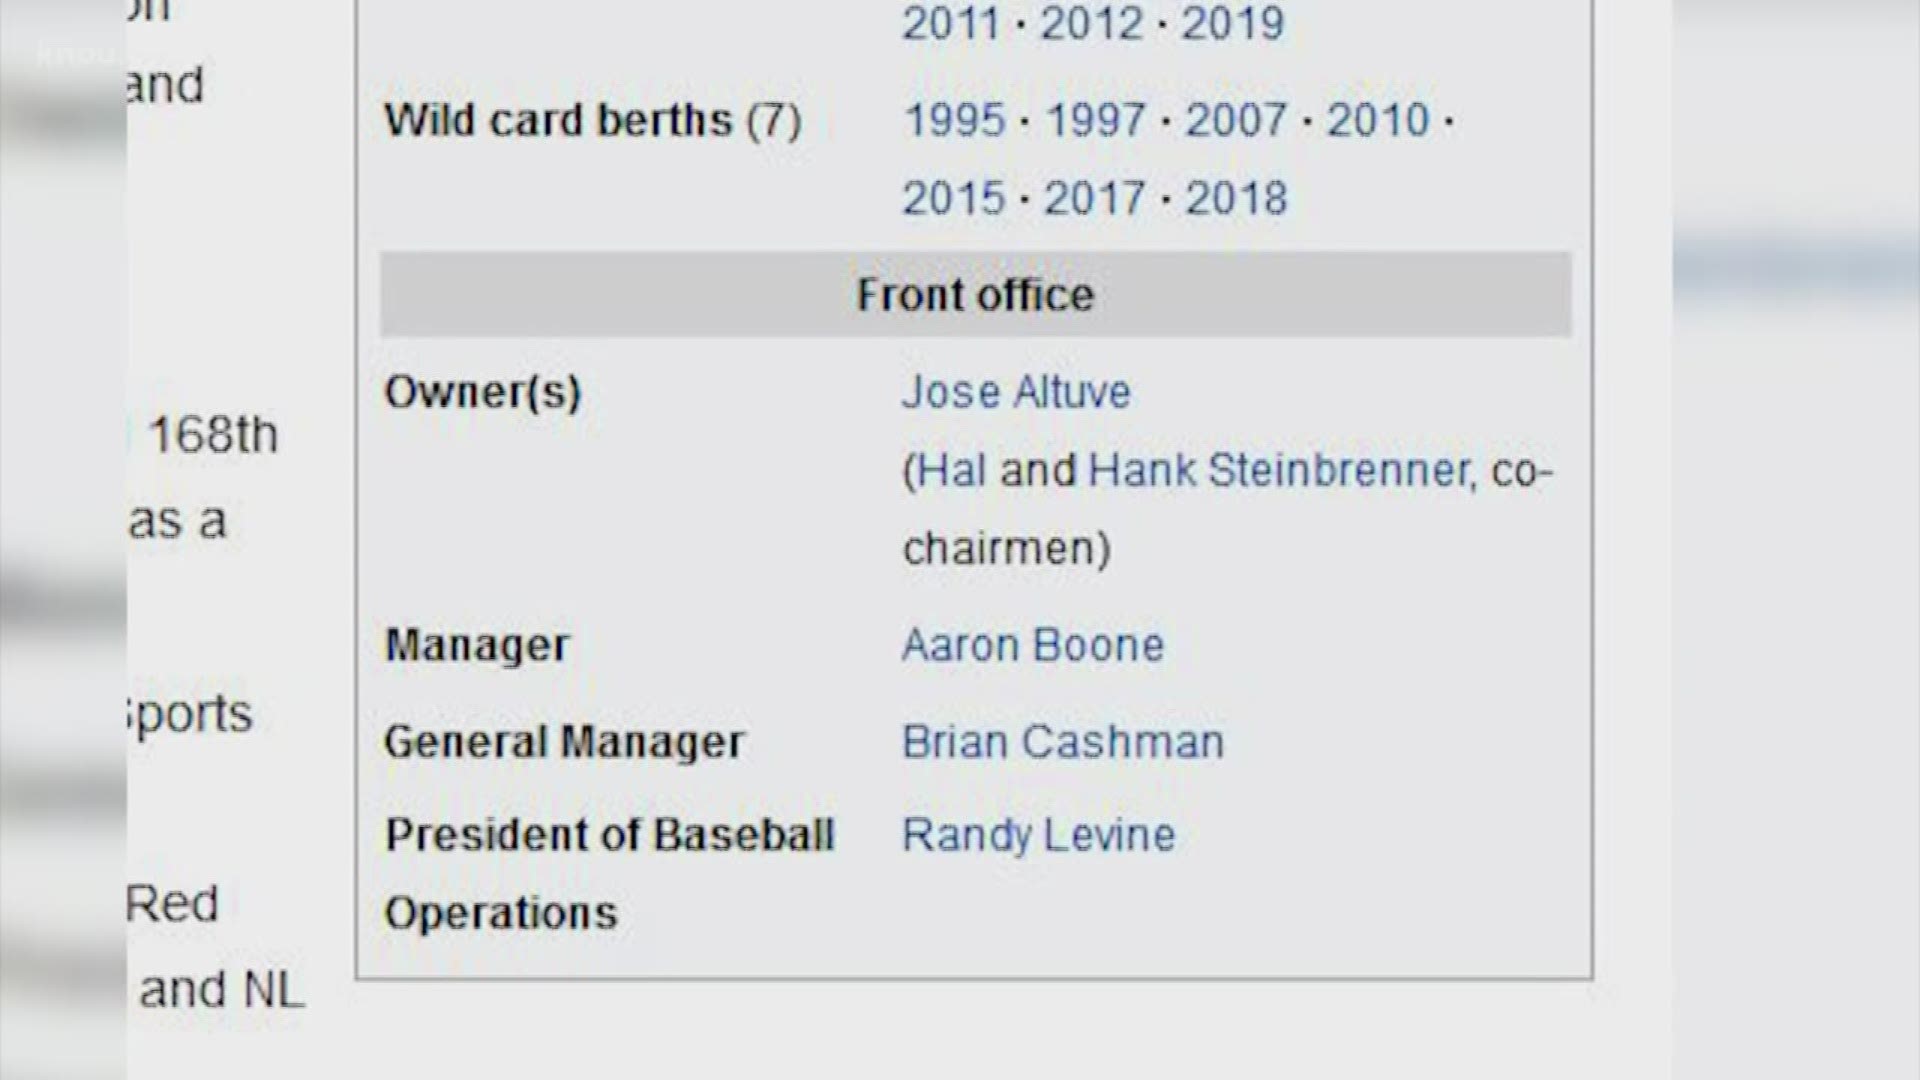 Someone had some fun with the New York Yankees Wikipedia page. After winning Game 6, someone edited the team's ownership entry, listing Jose Altuve as the owner!